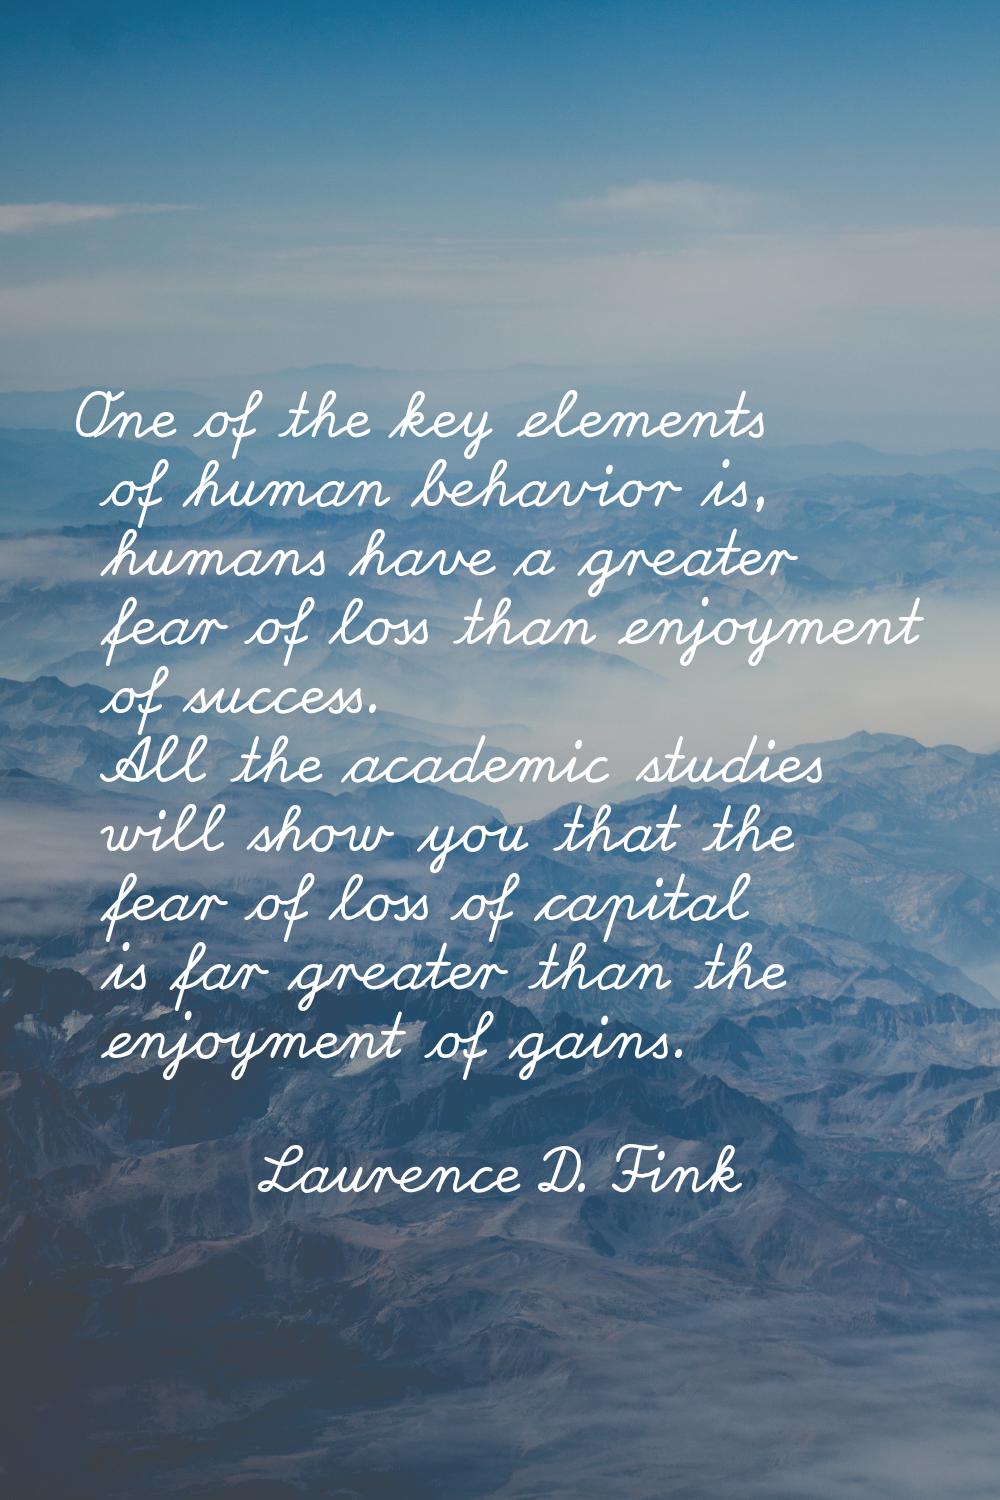 One of the key elements of human behavior is, humans have a greater fear of loss than enjoyment of 